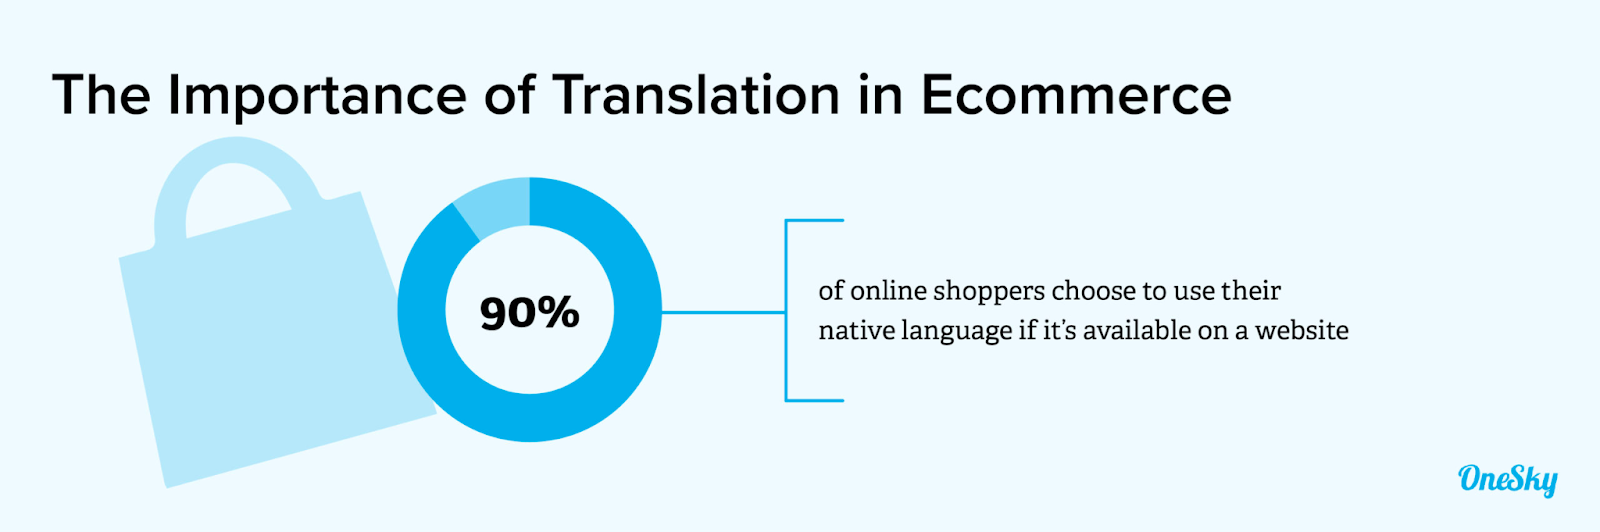 the importance of translation in ecommerce